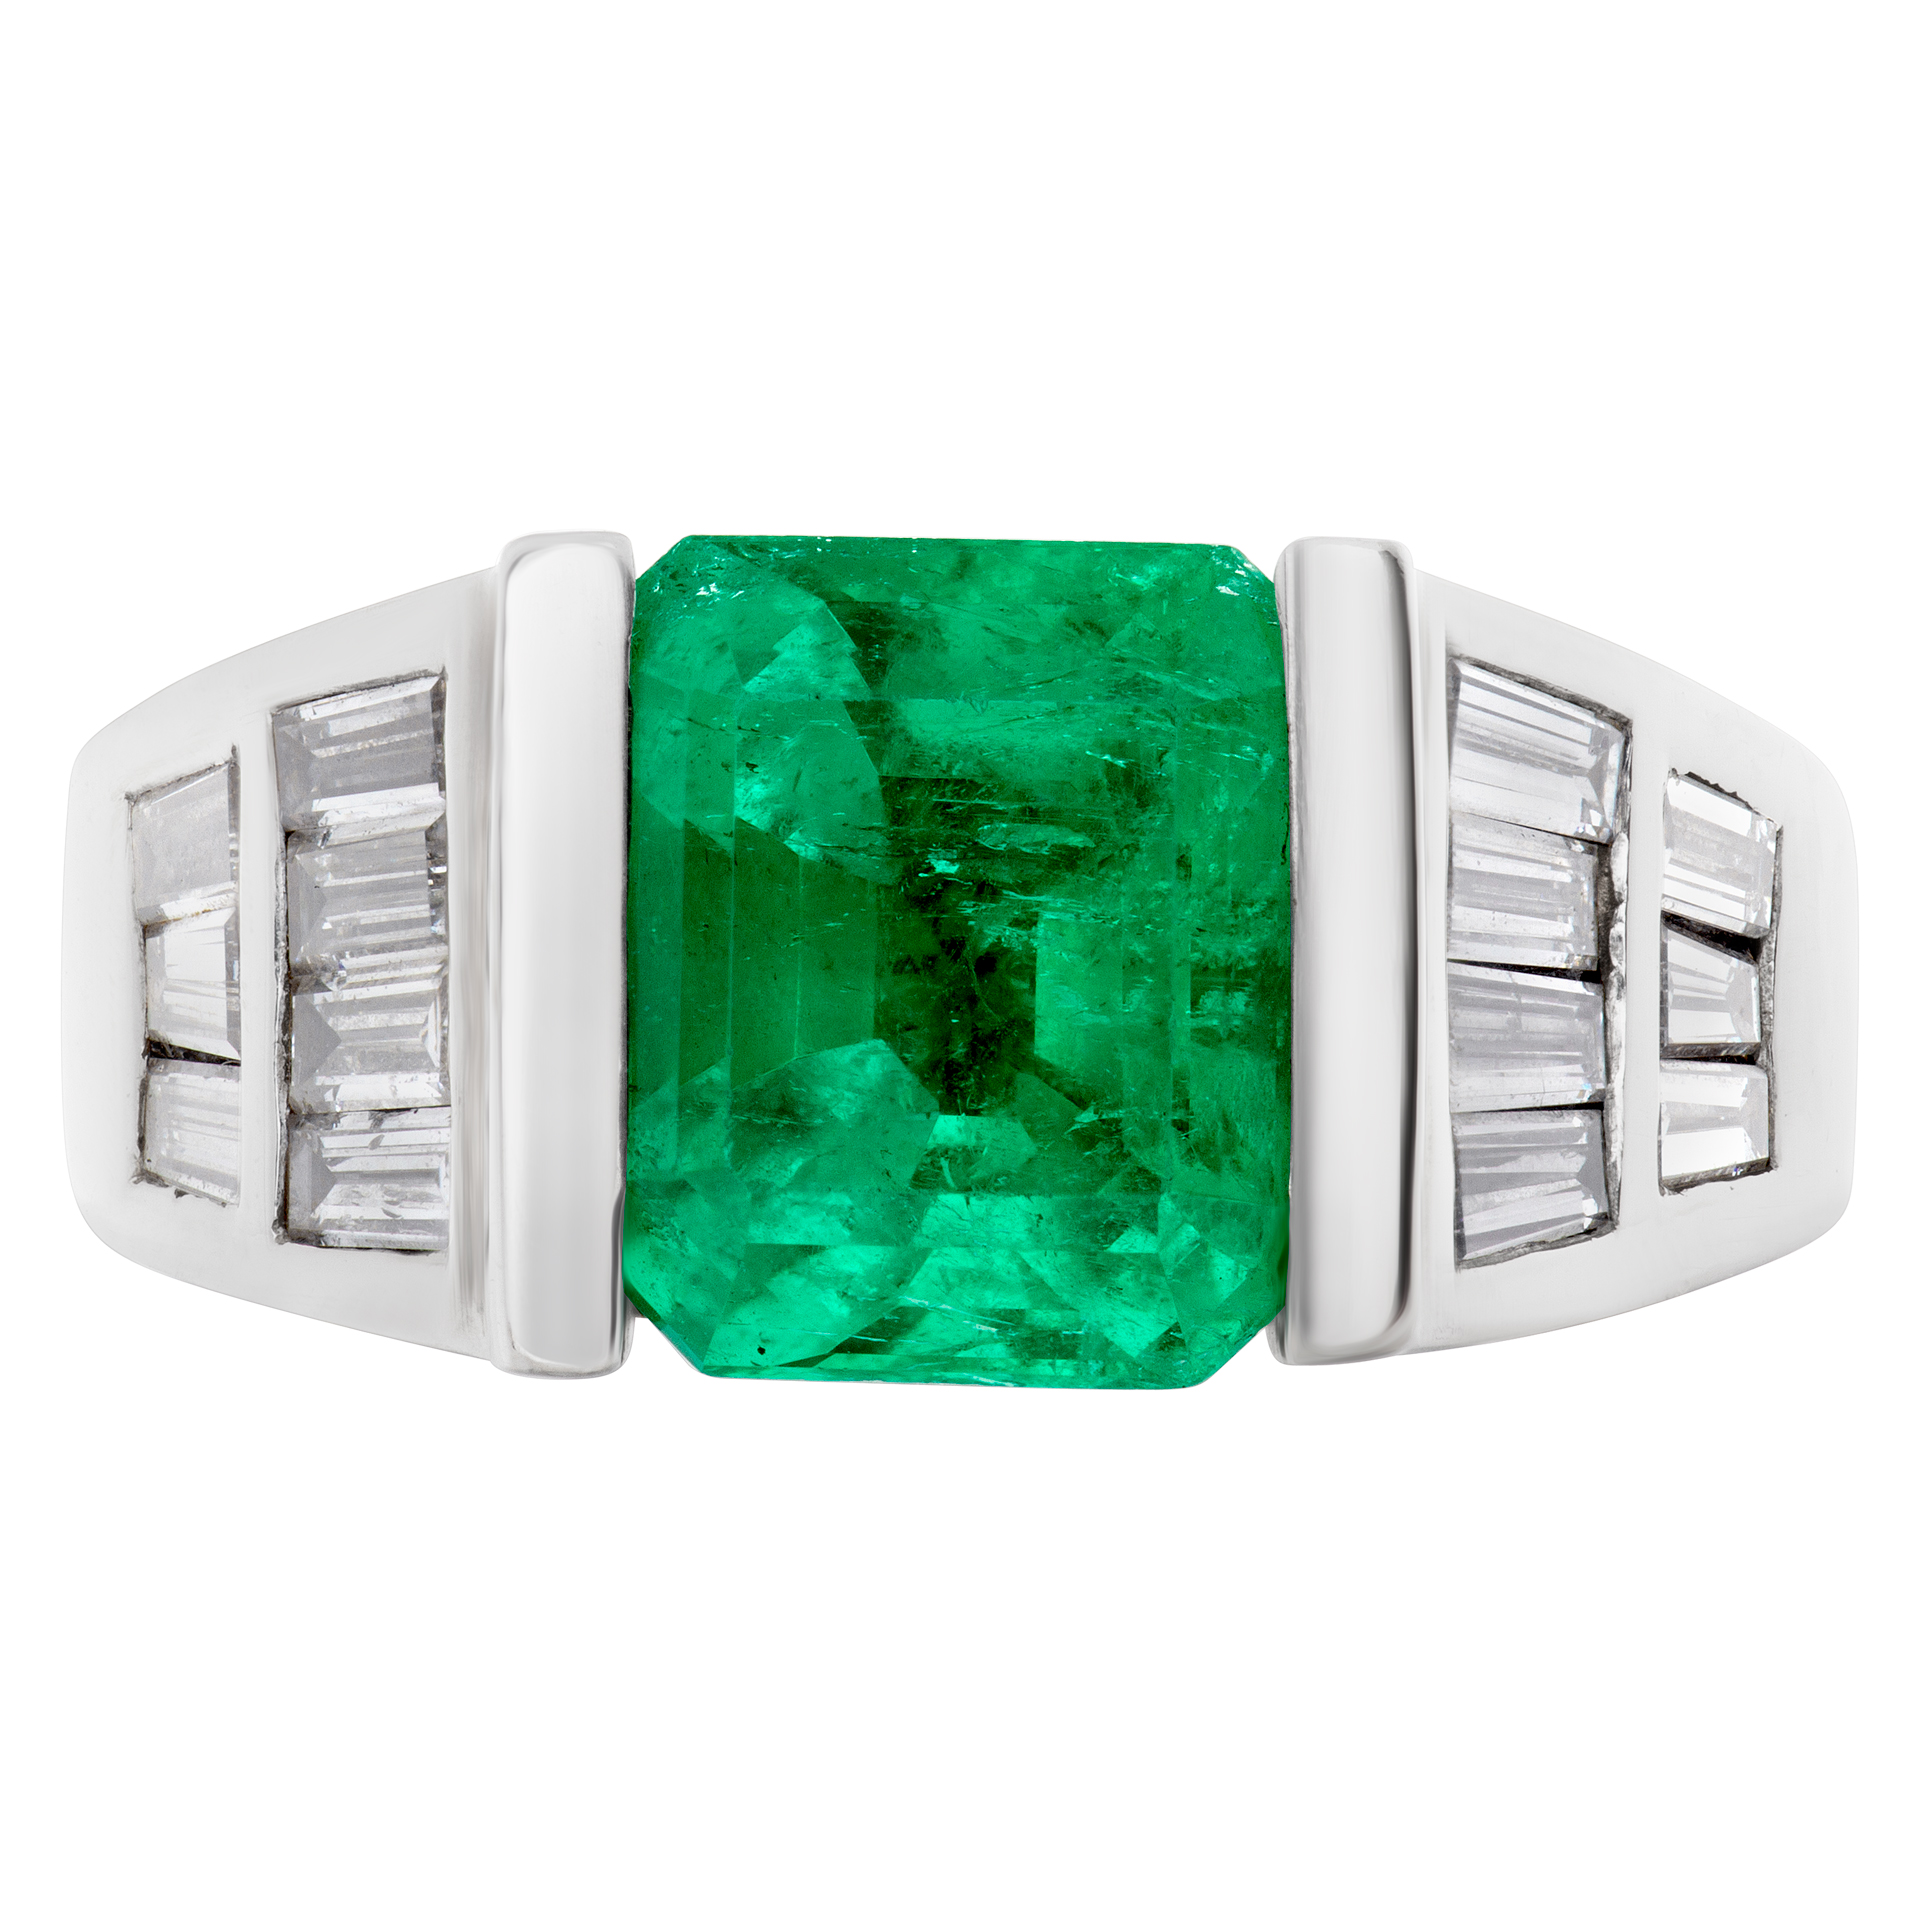 Emerald ring in 14k white gold. 3.16 Carat emerald, 1.05 Cts in diamonds. image 2